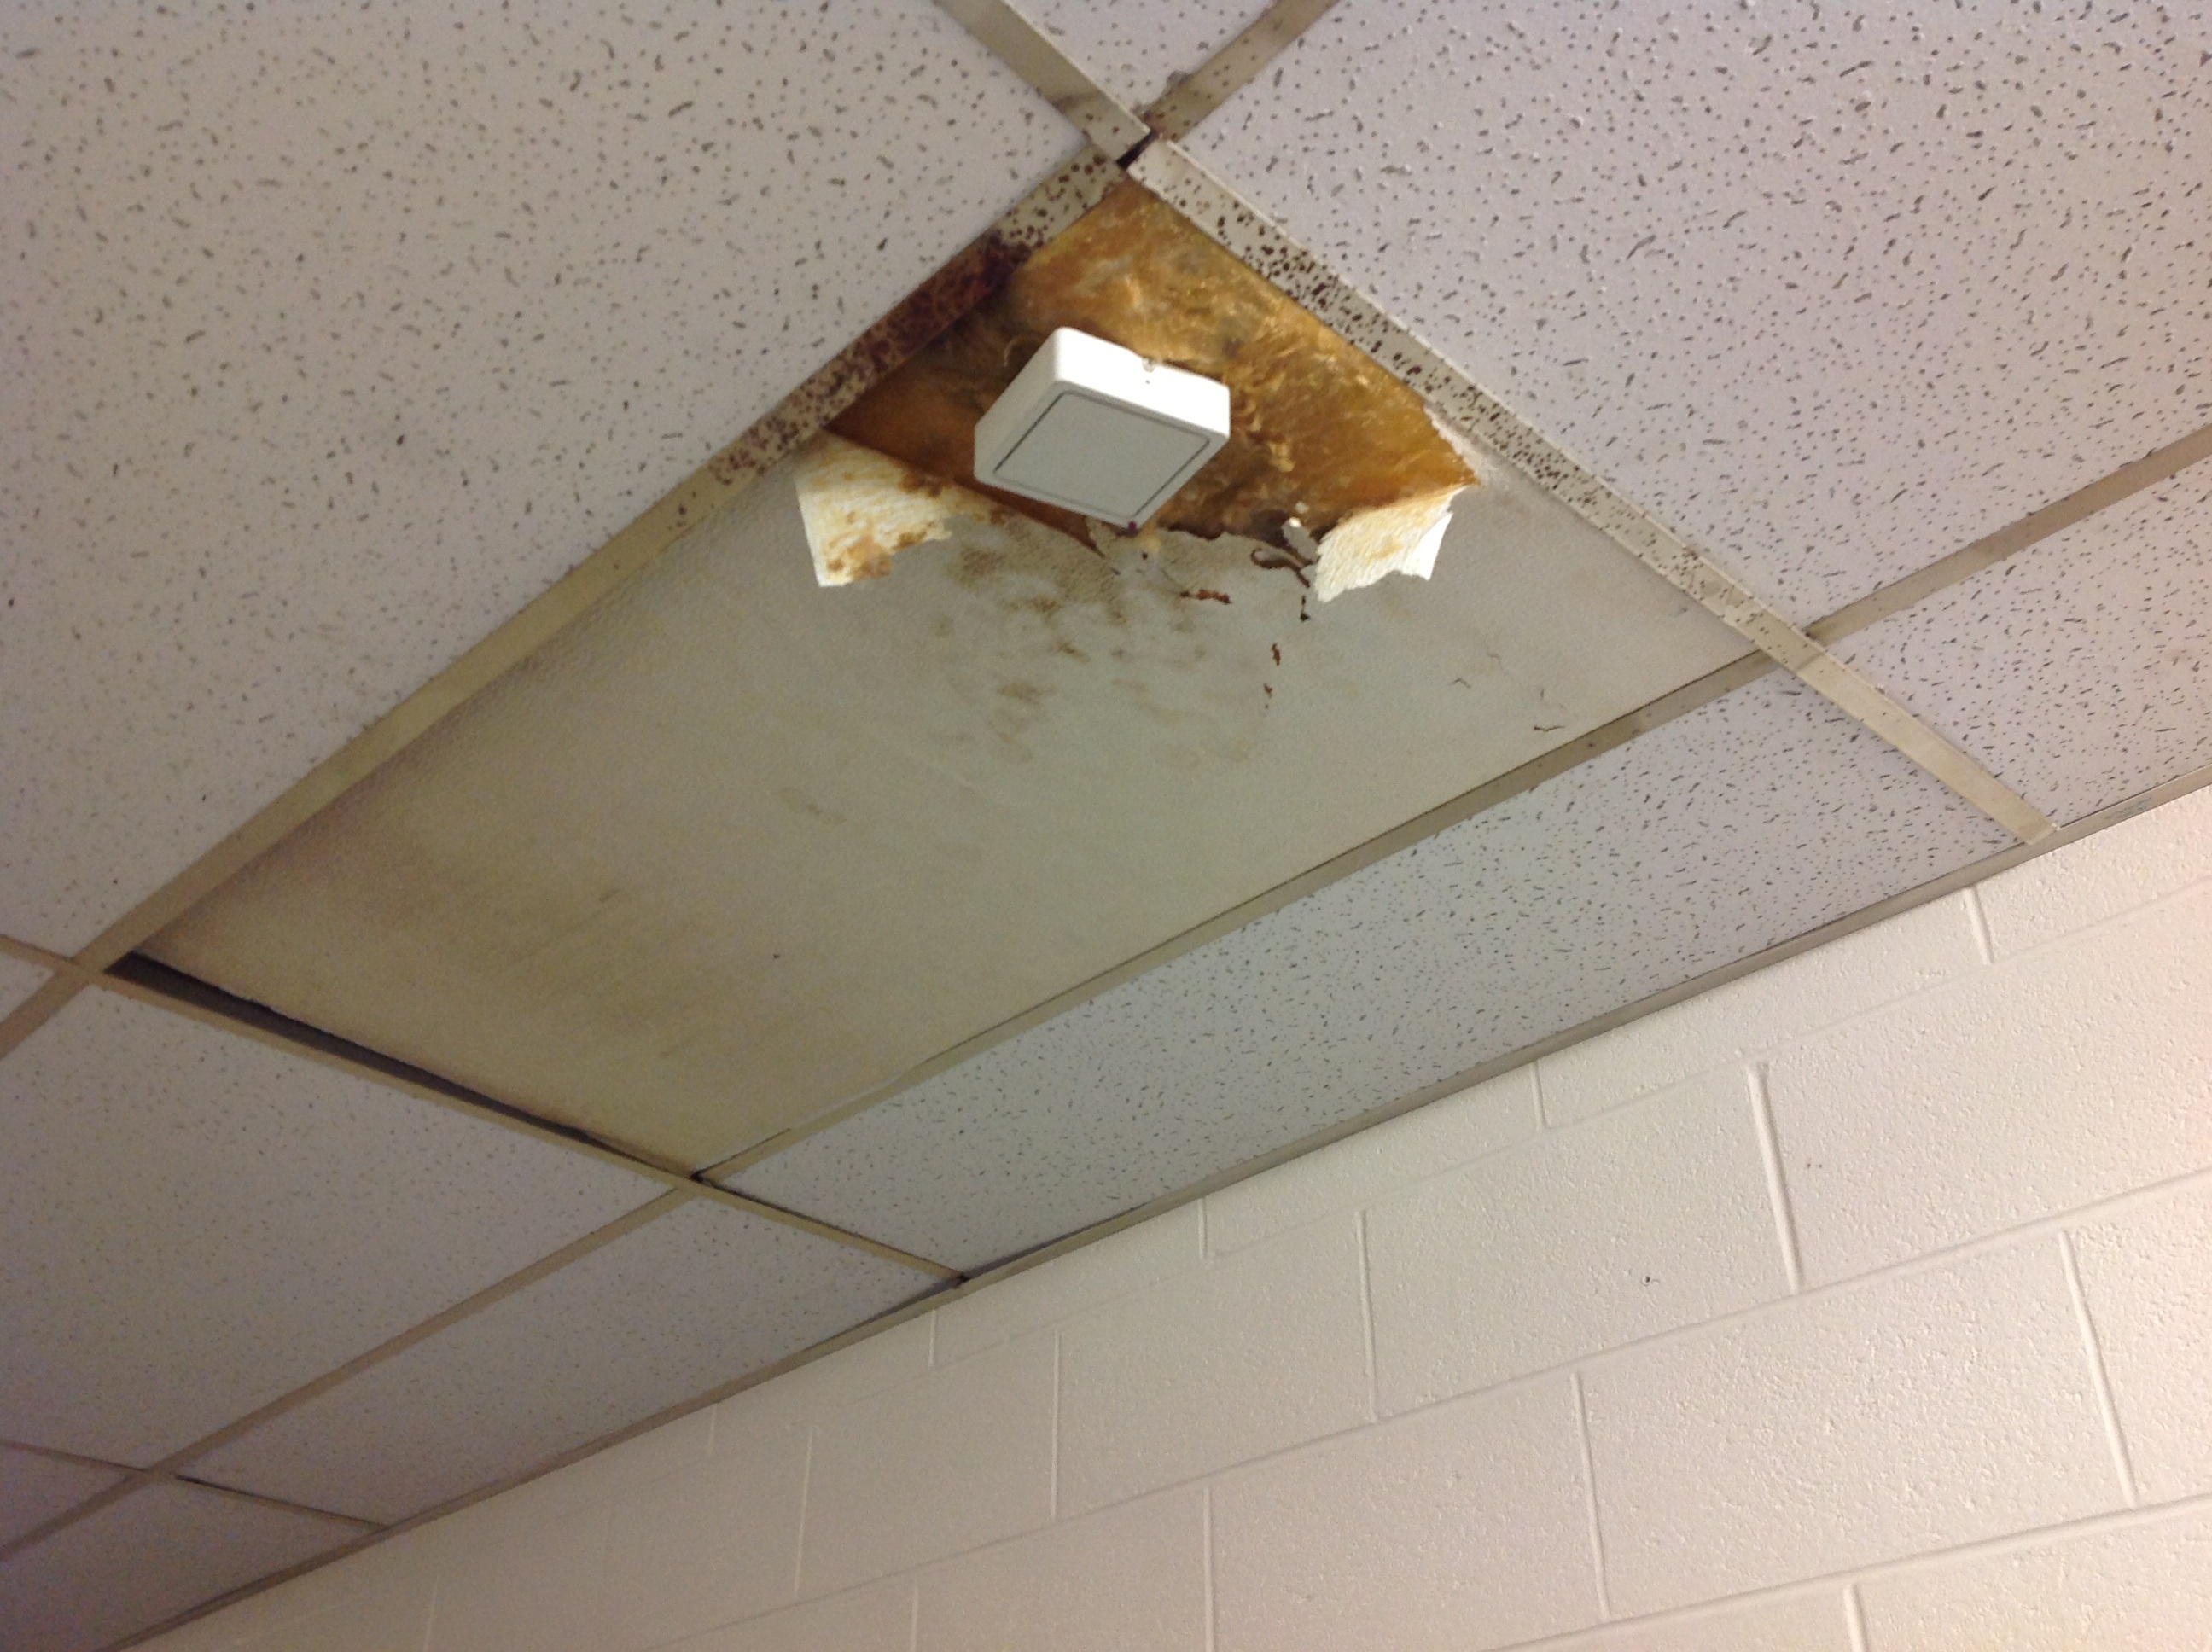 moisture damaged ceiling tiles with possible black mold.